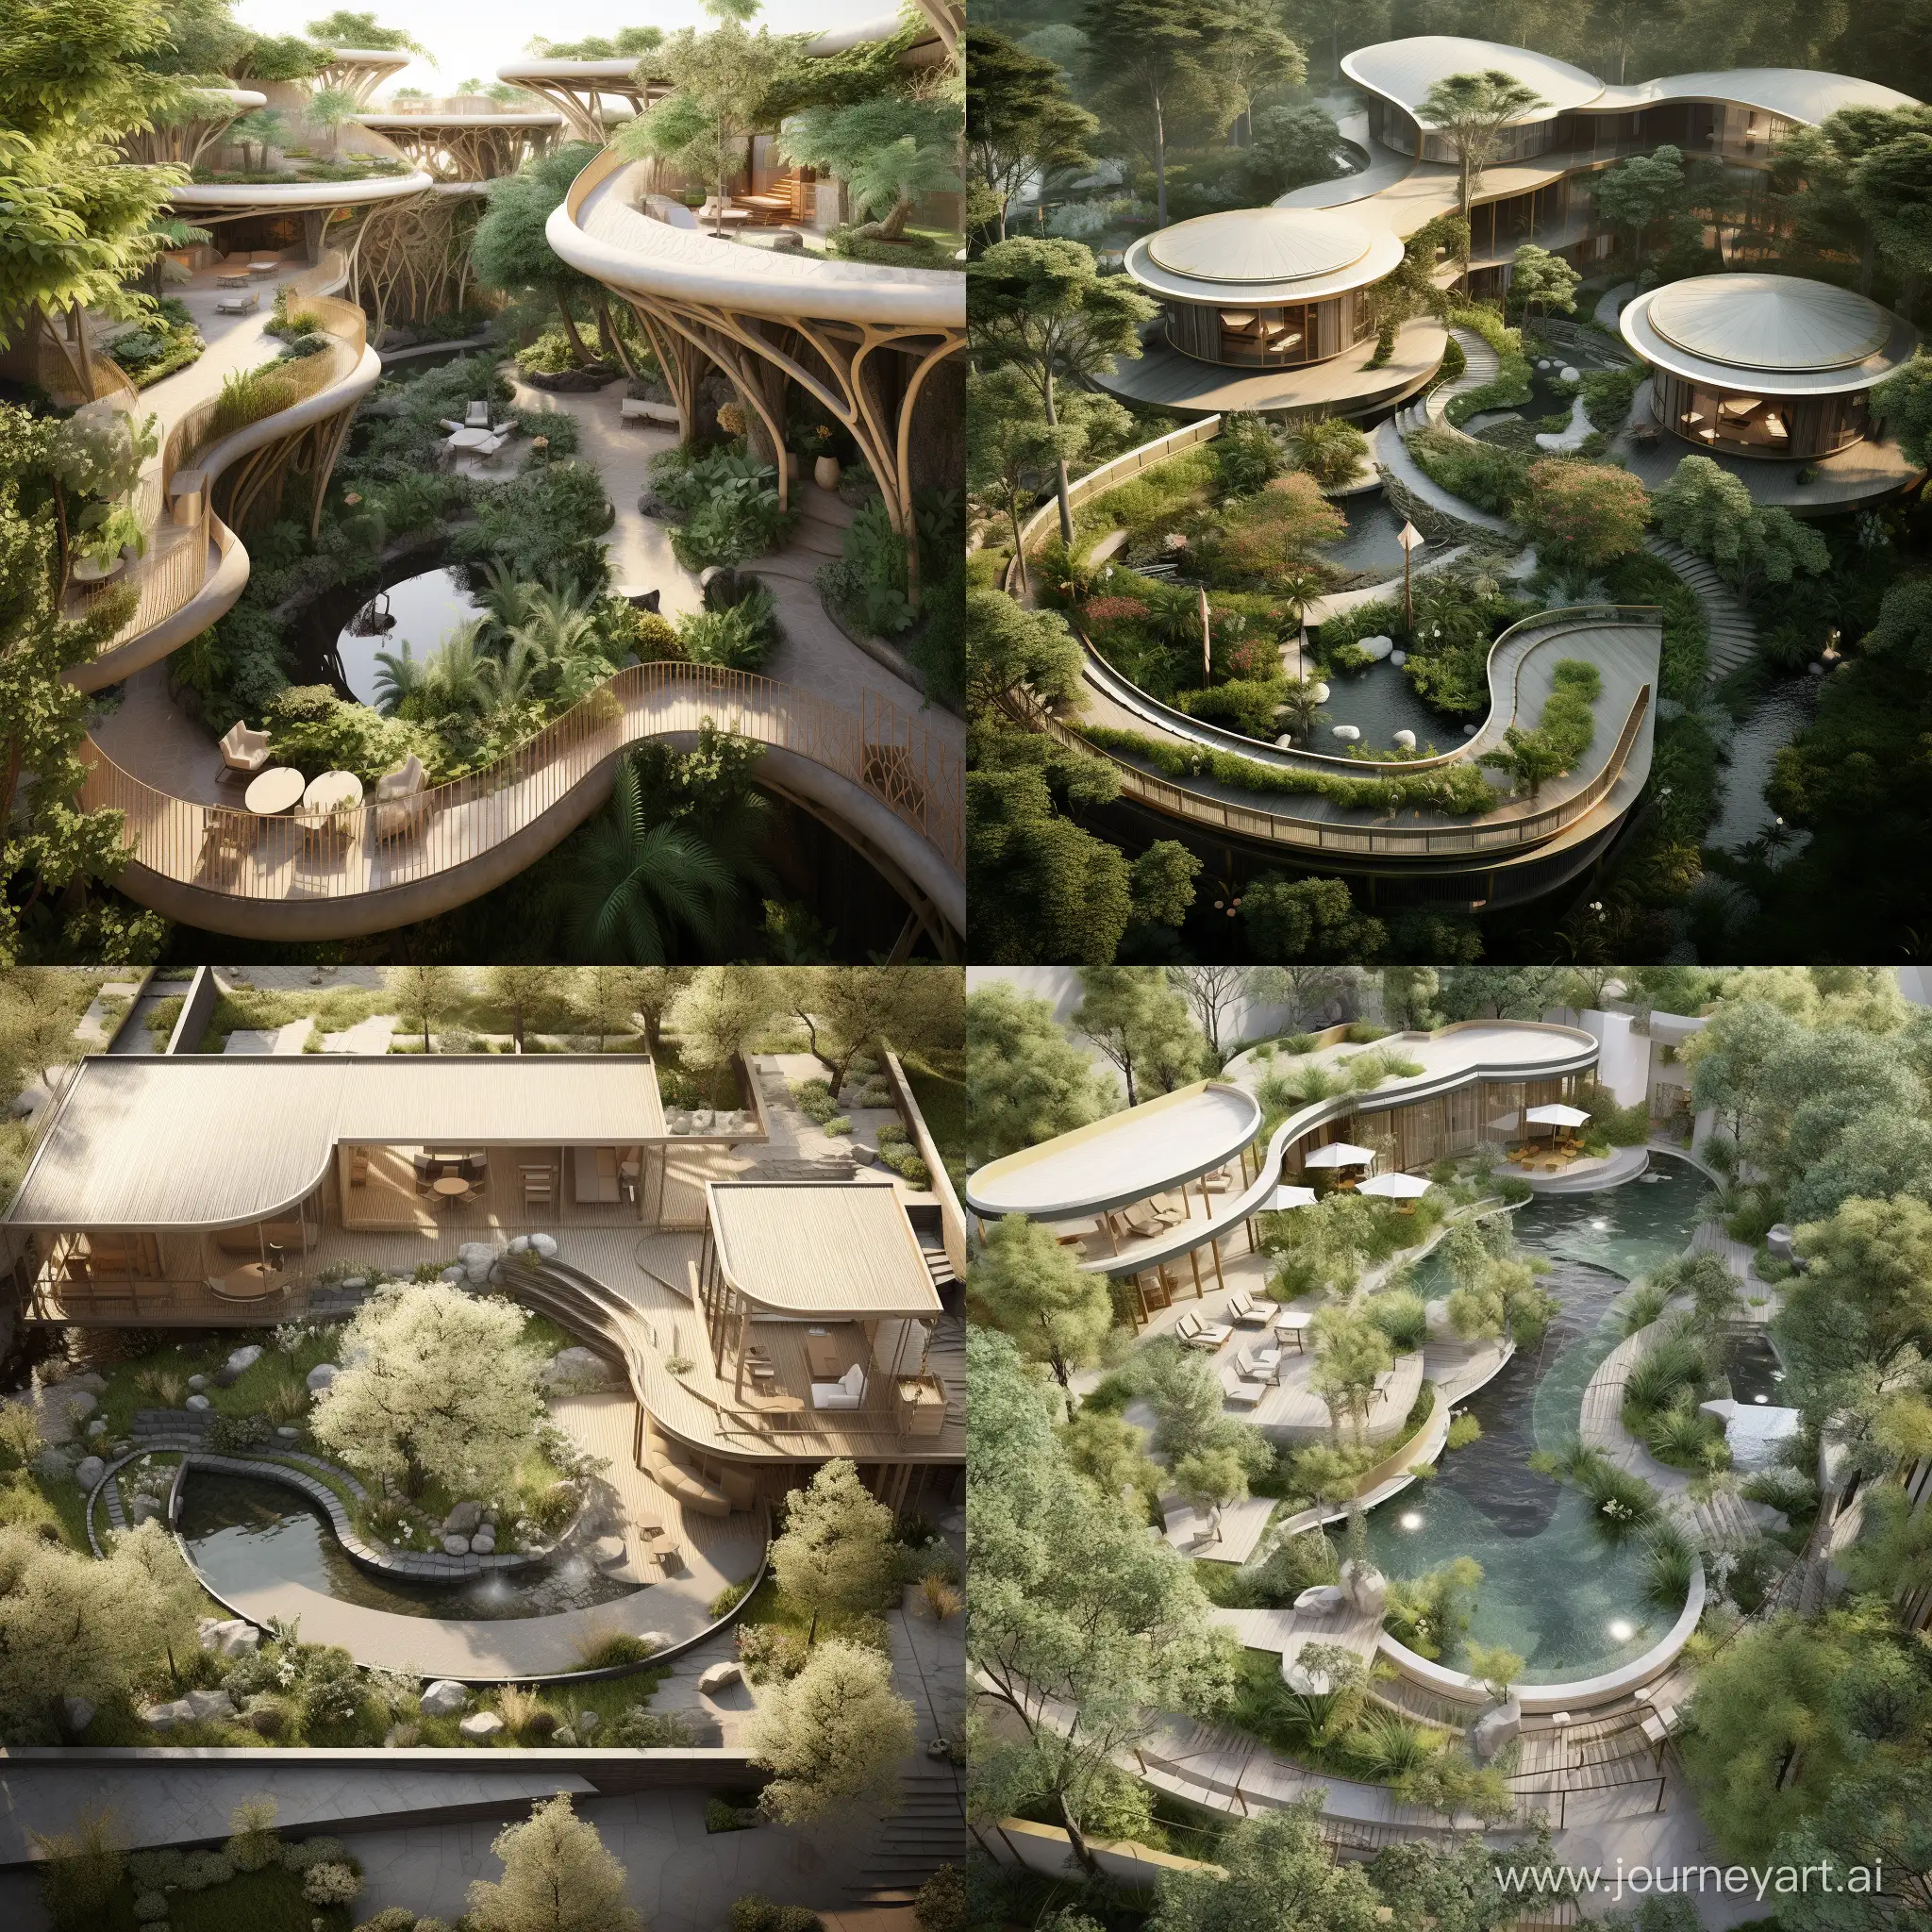 The design of the overview of the Iranian garden and the spa center with the approach of organic architecture in Iran from a bird's eye view and a human view in the style of linear and angular architecture